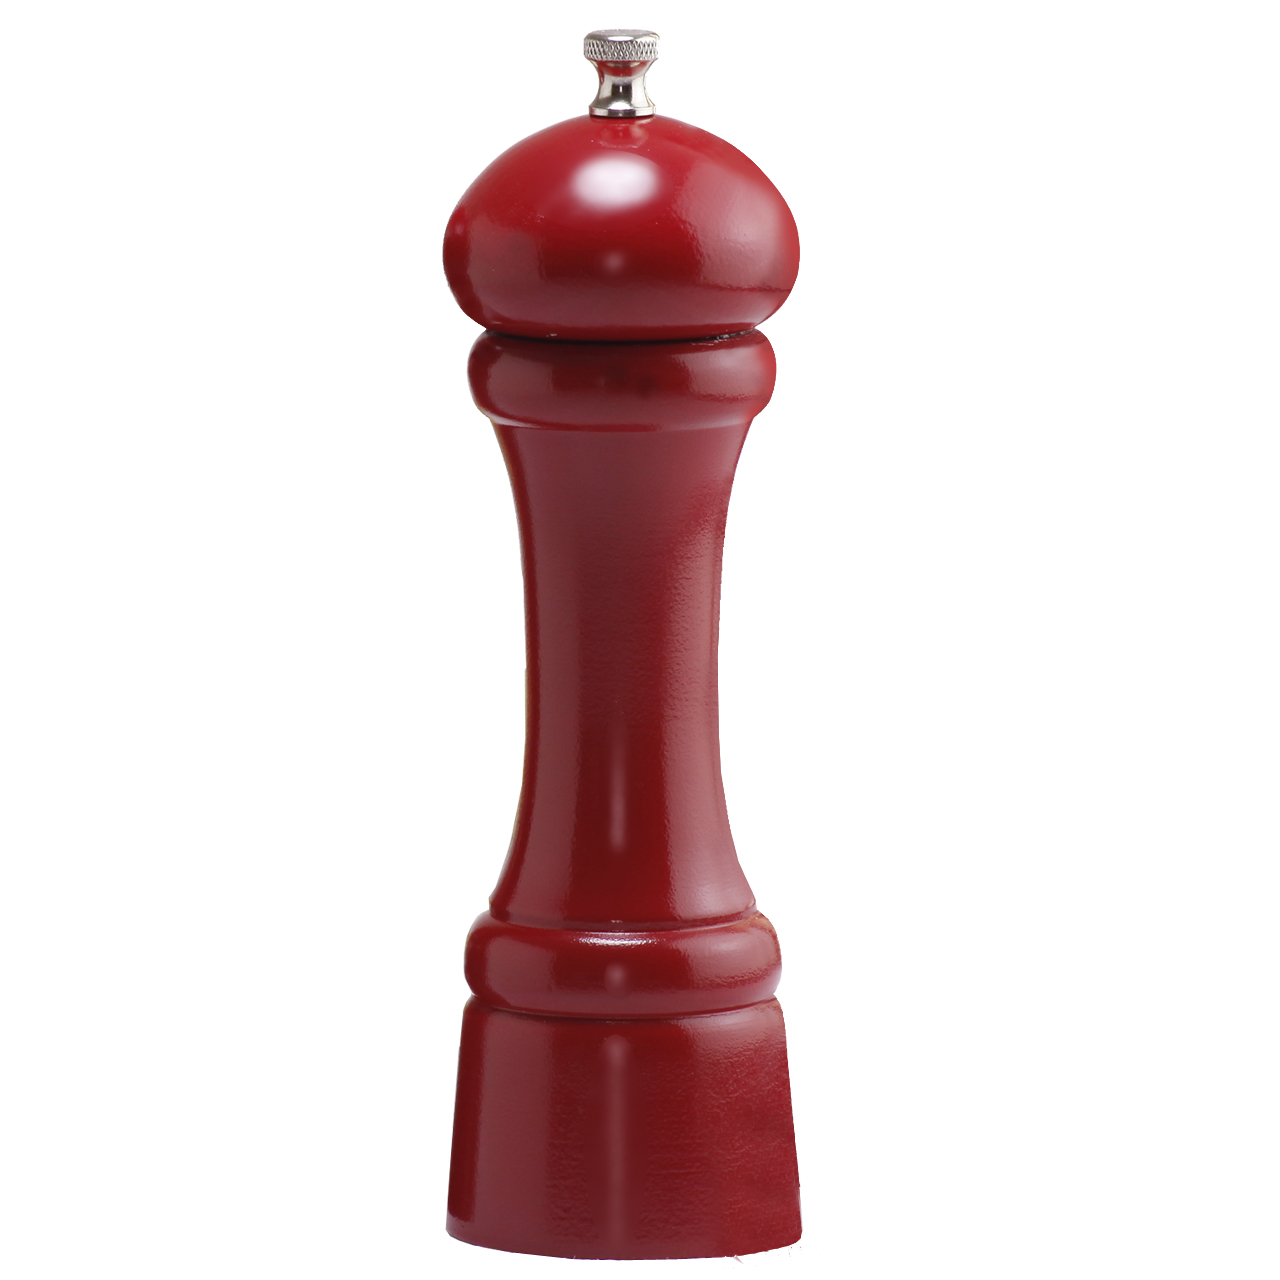 08652 8 In. Candy Apple Red Salt Mill